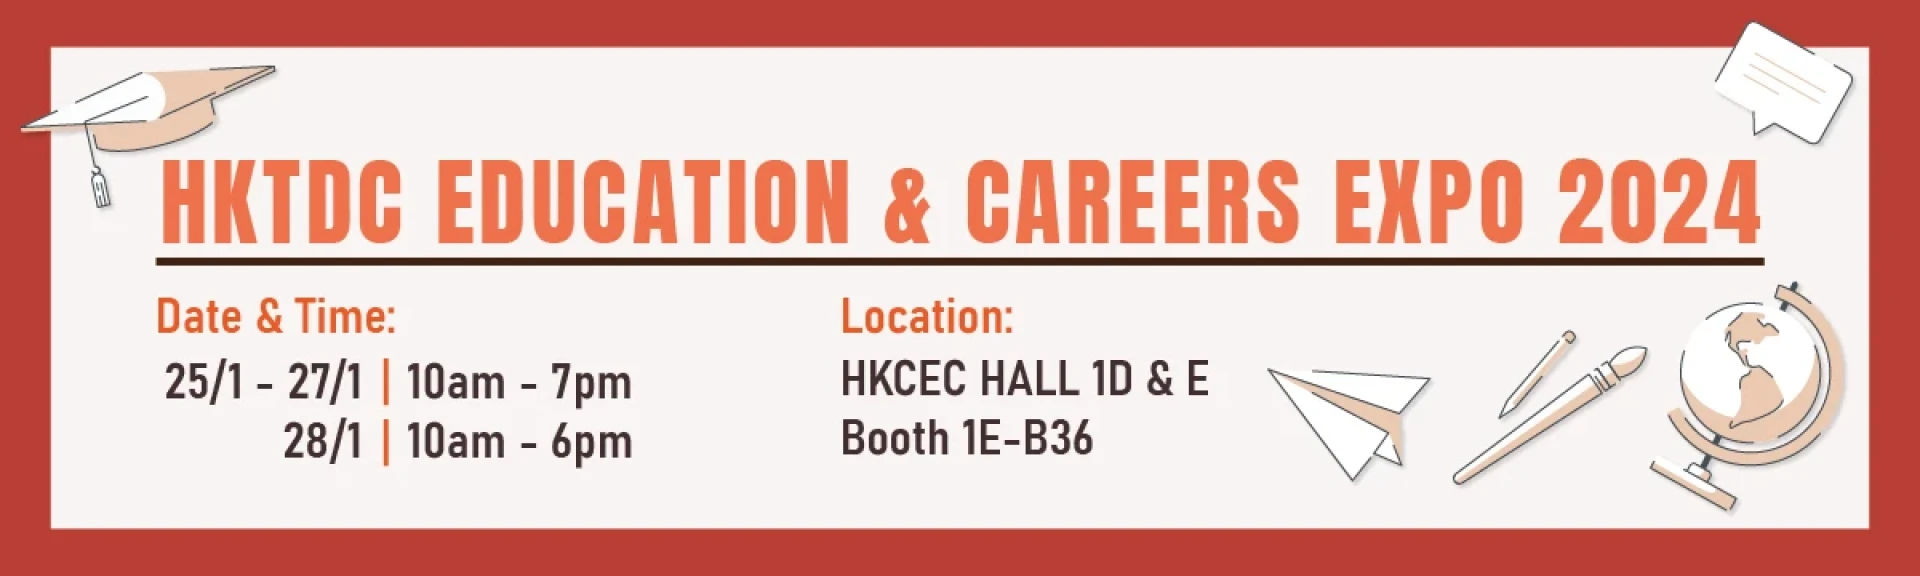 Learn More About Art Tech and Performing Arts at HKTDC Education and Career Expo